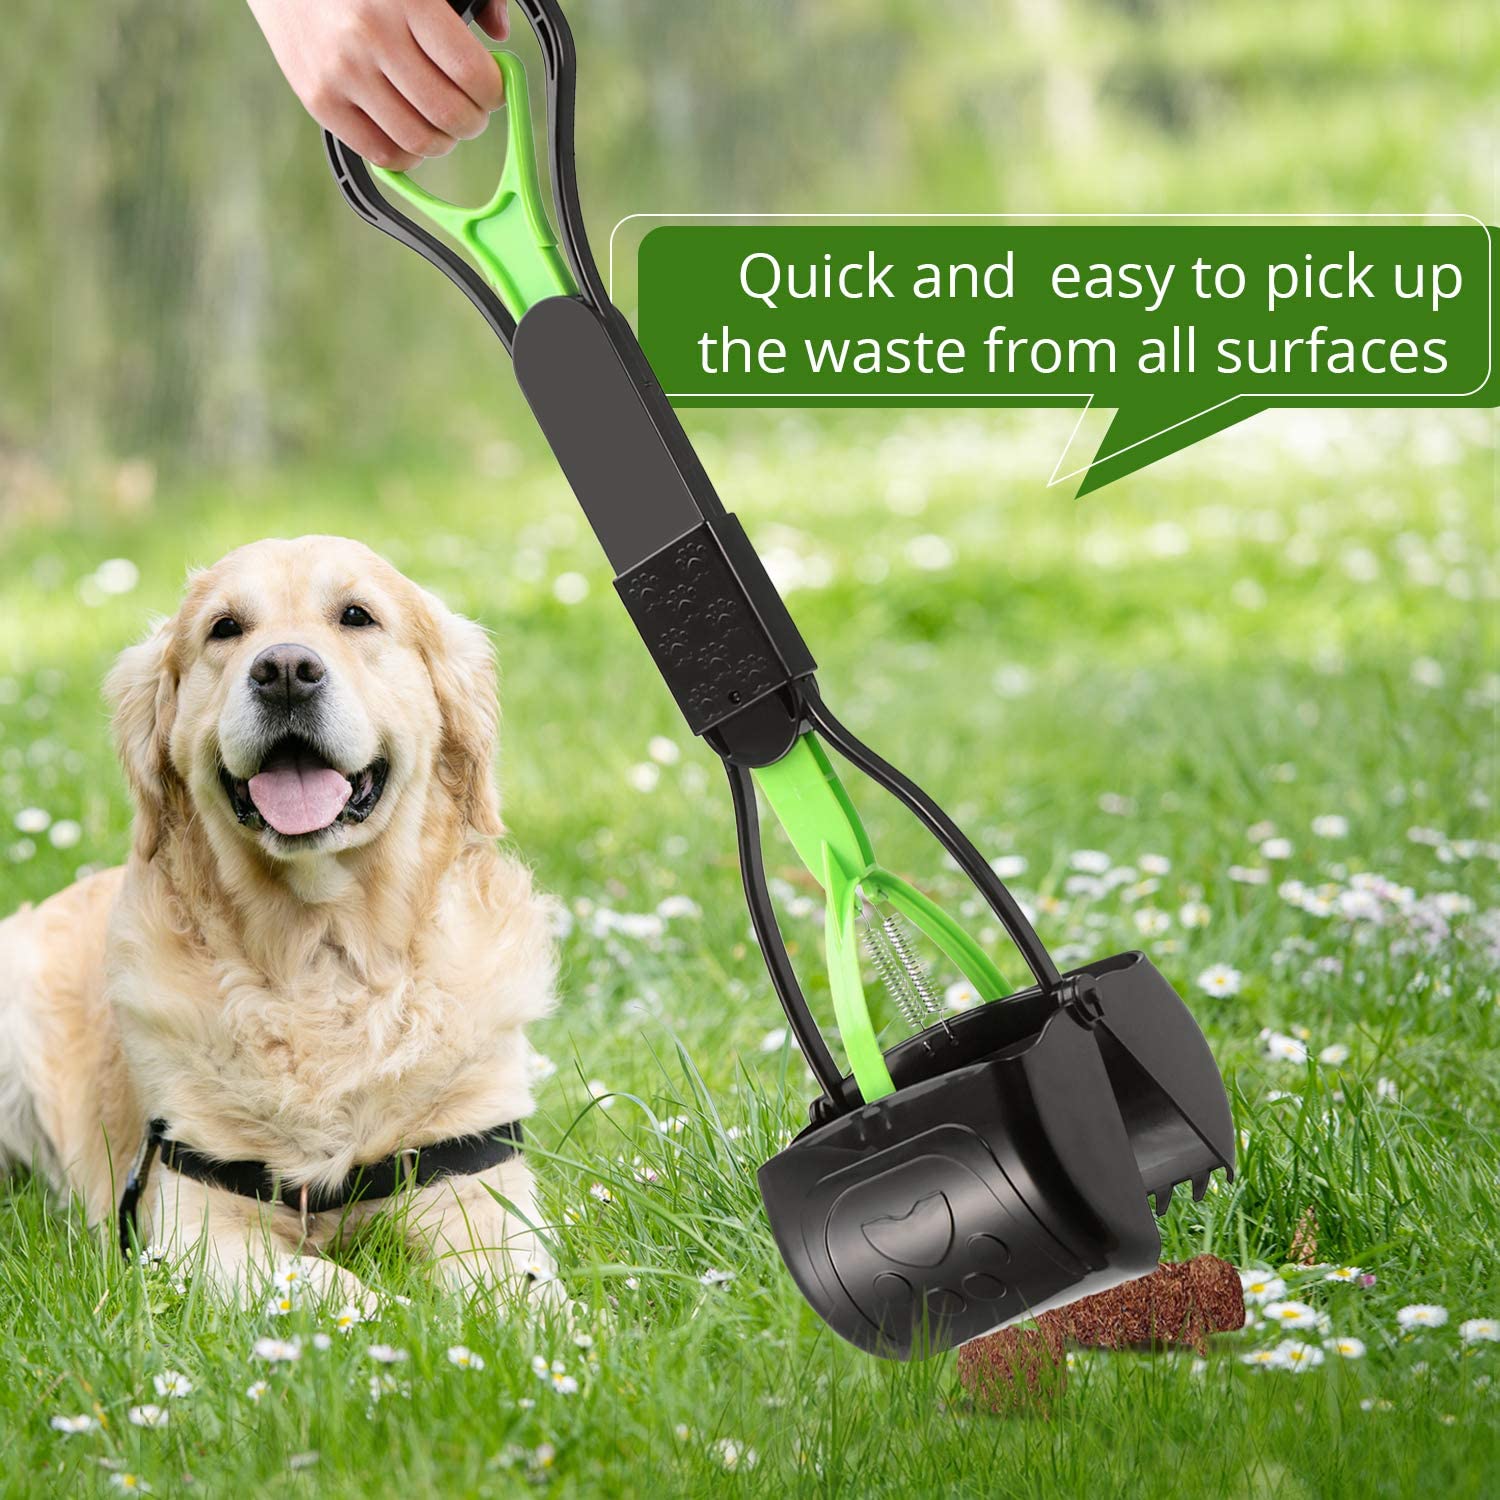 Portable Pet Pooper Scooper for Dogs and Cats Gravel Dirt Foldable Poop Scoop Pet Waste Pickup Tool Suitable for Grass 